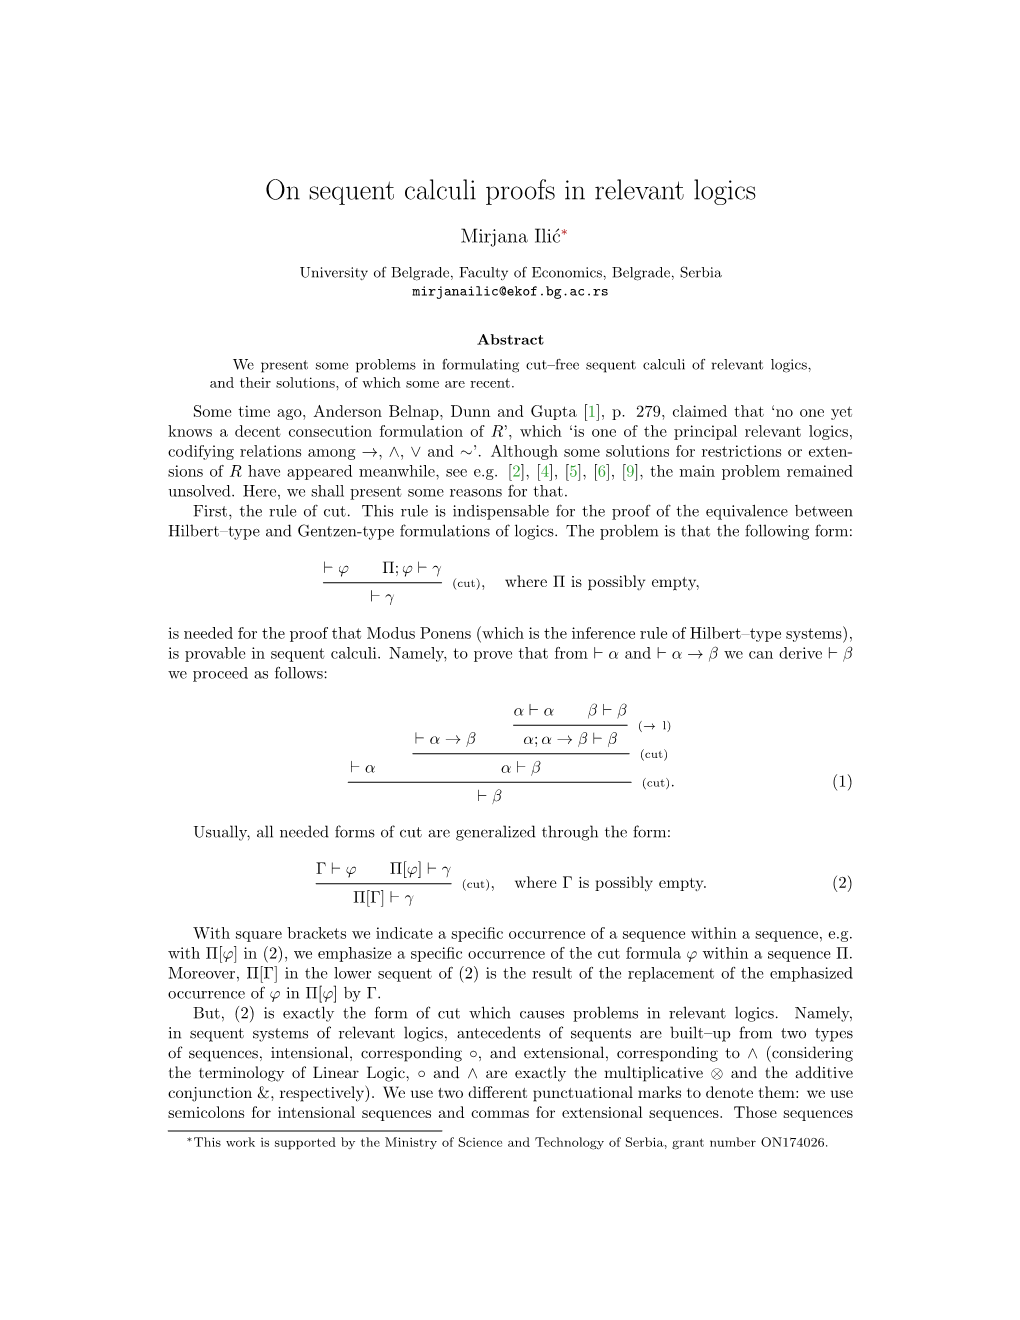 On Sequent Calculi Proofs in Relevant Logics